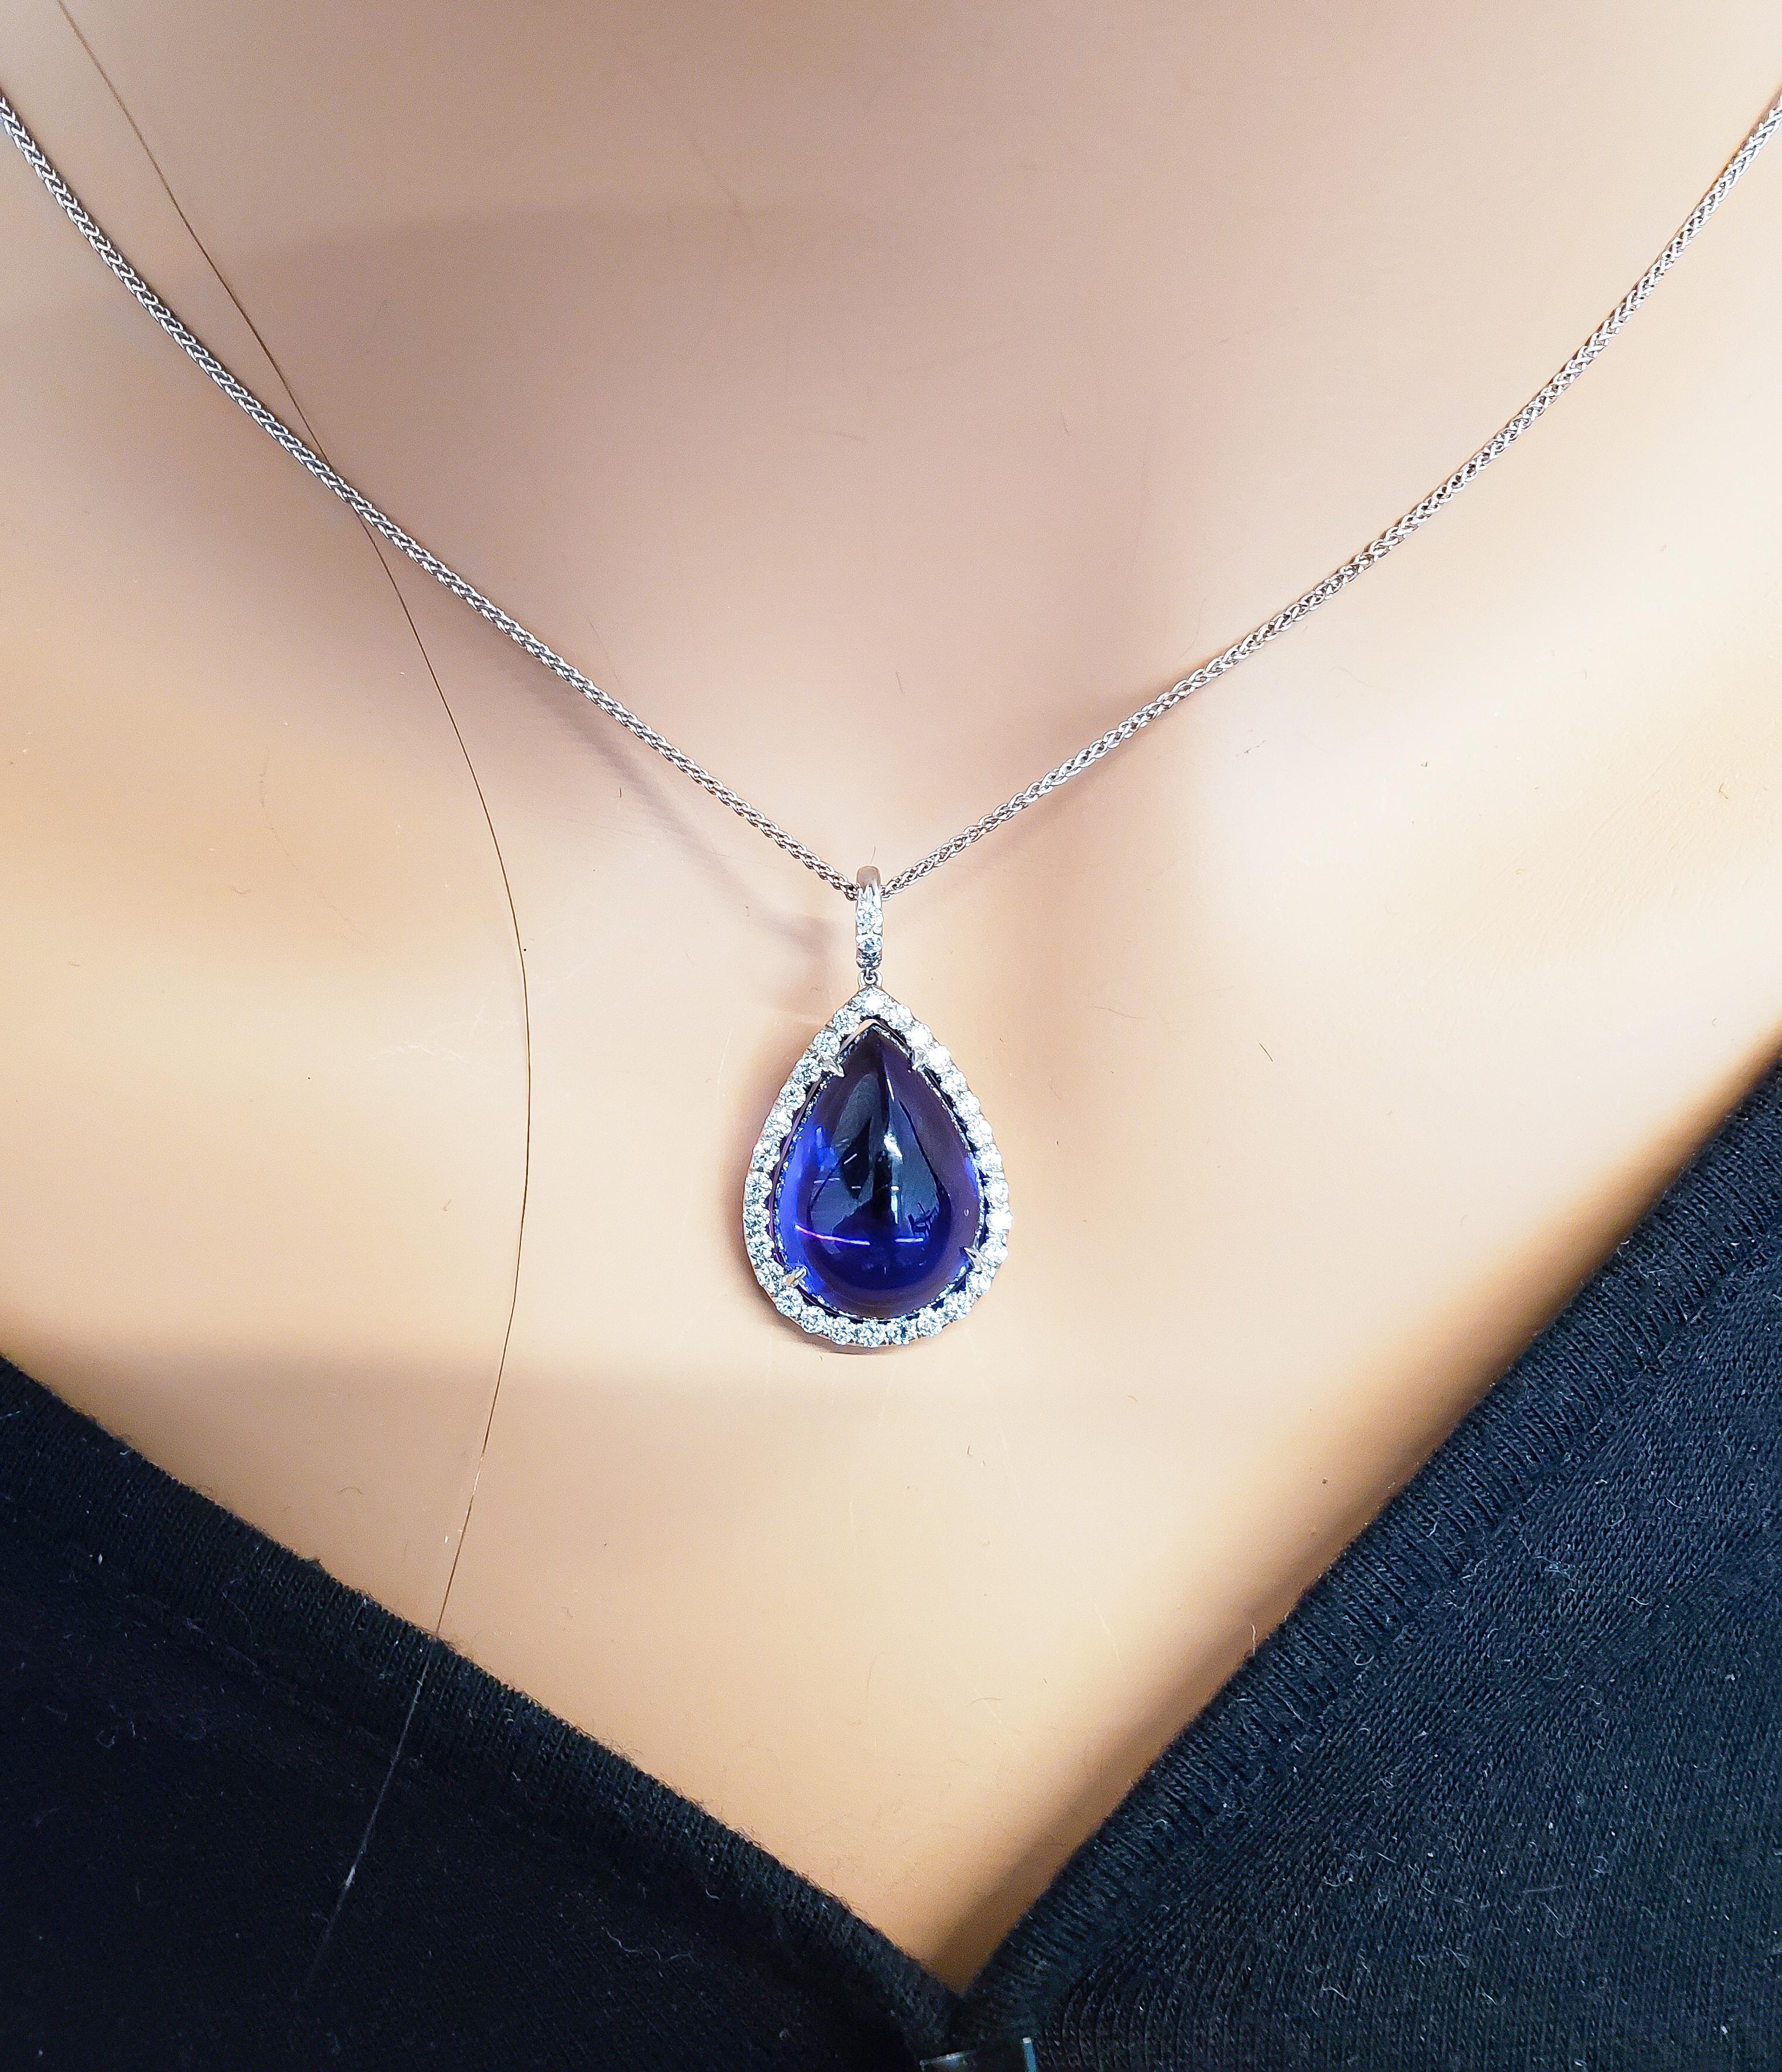 Inspired by vintage styles, this gorgeous brightly polished 18 karat white gold teardrop pendant features one pear cabochon smooth finish sugar loaf tanzanite prong set it the center displaying a vibrant fine bluish-purple color. This precious